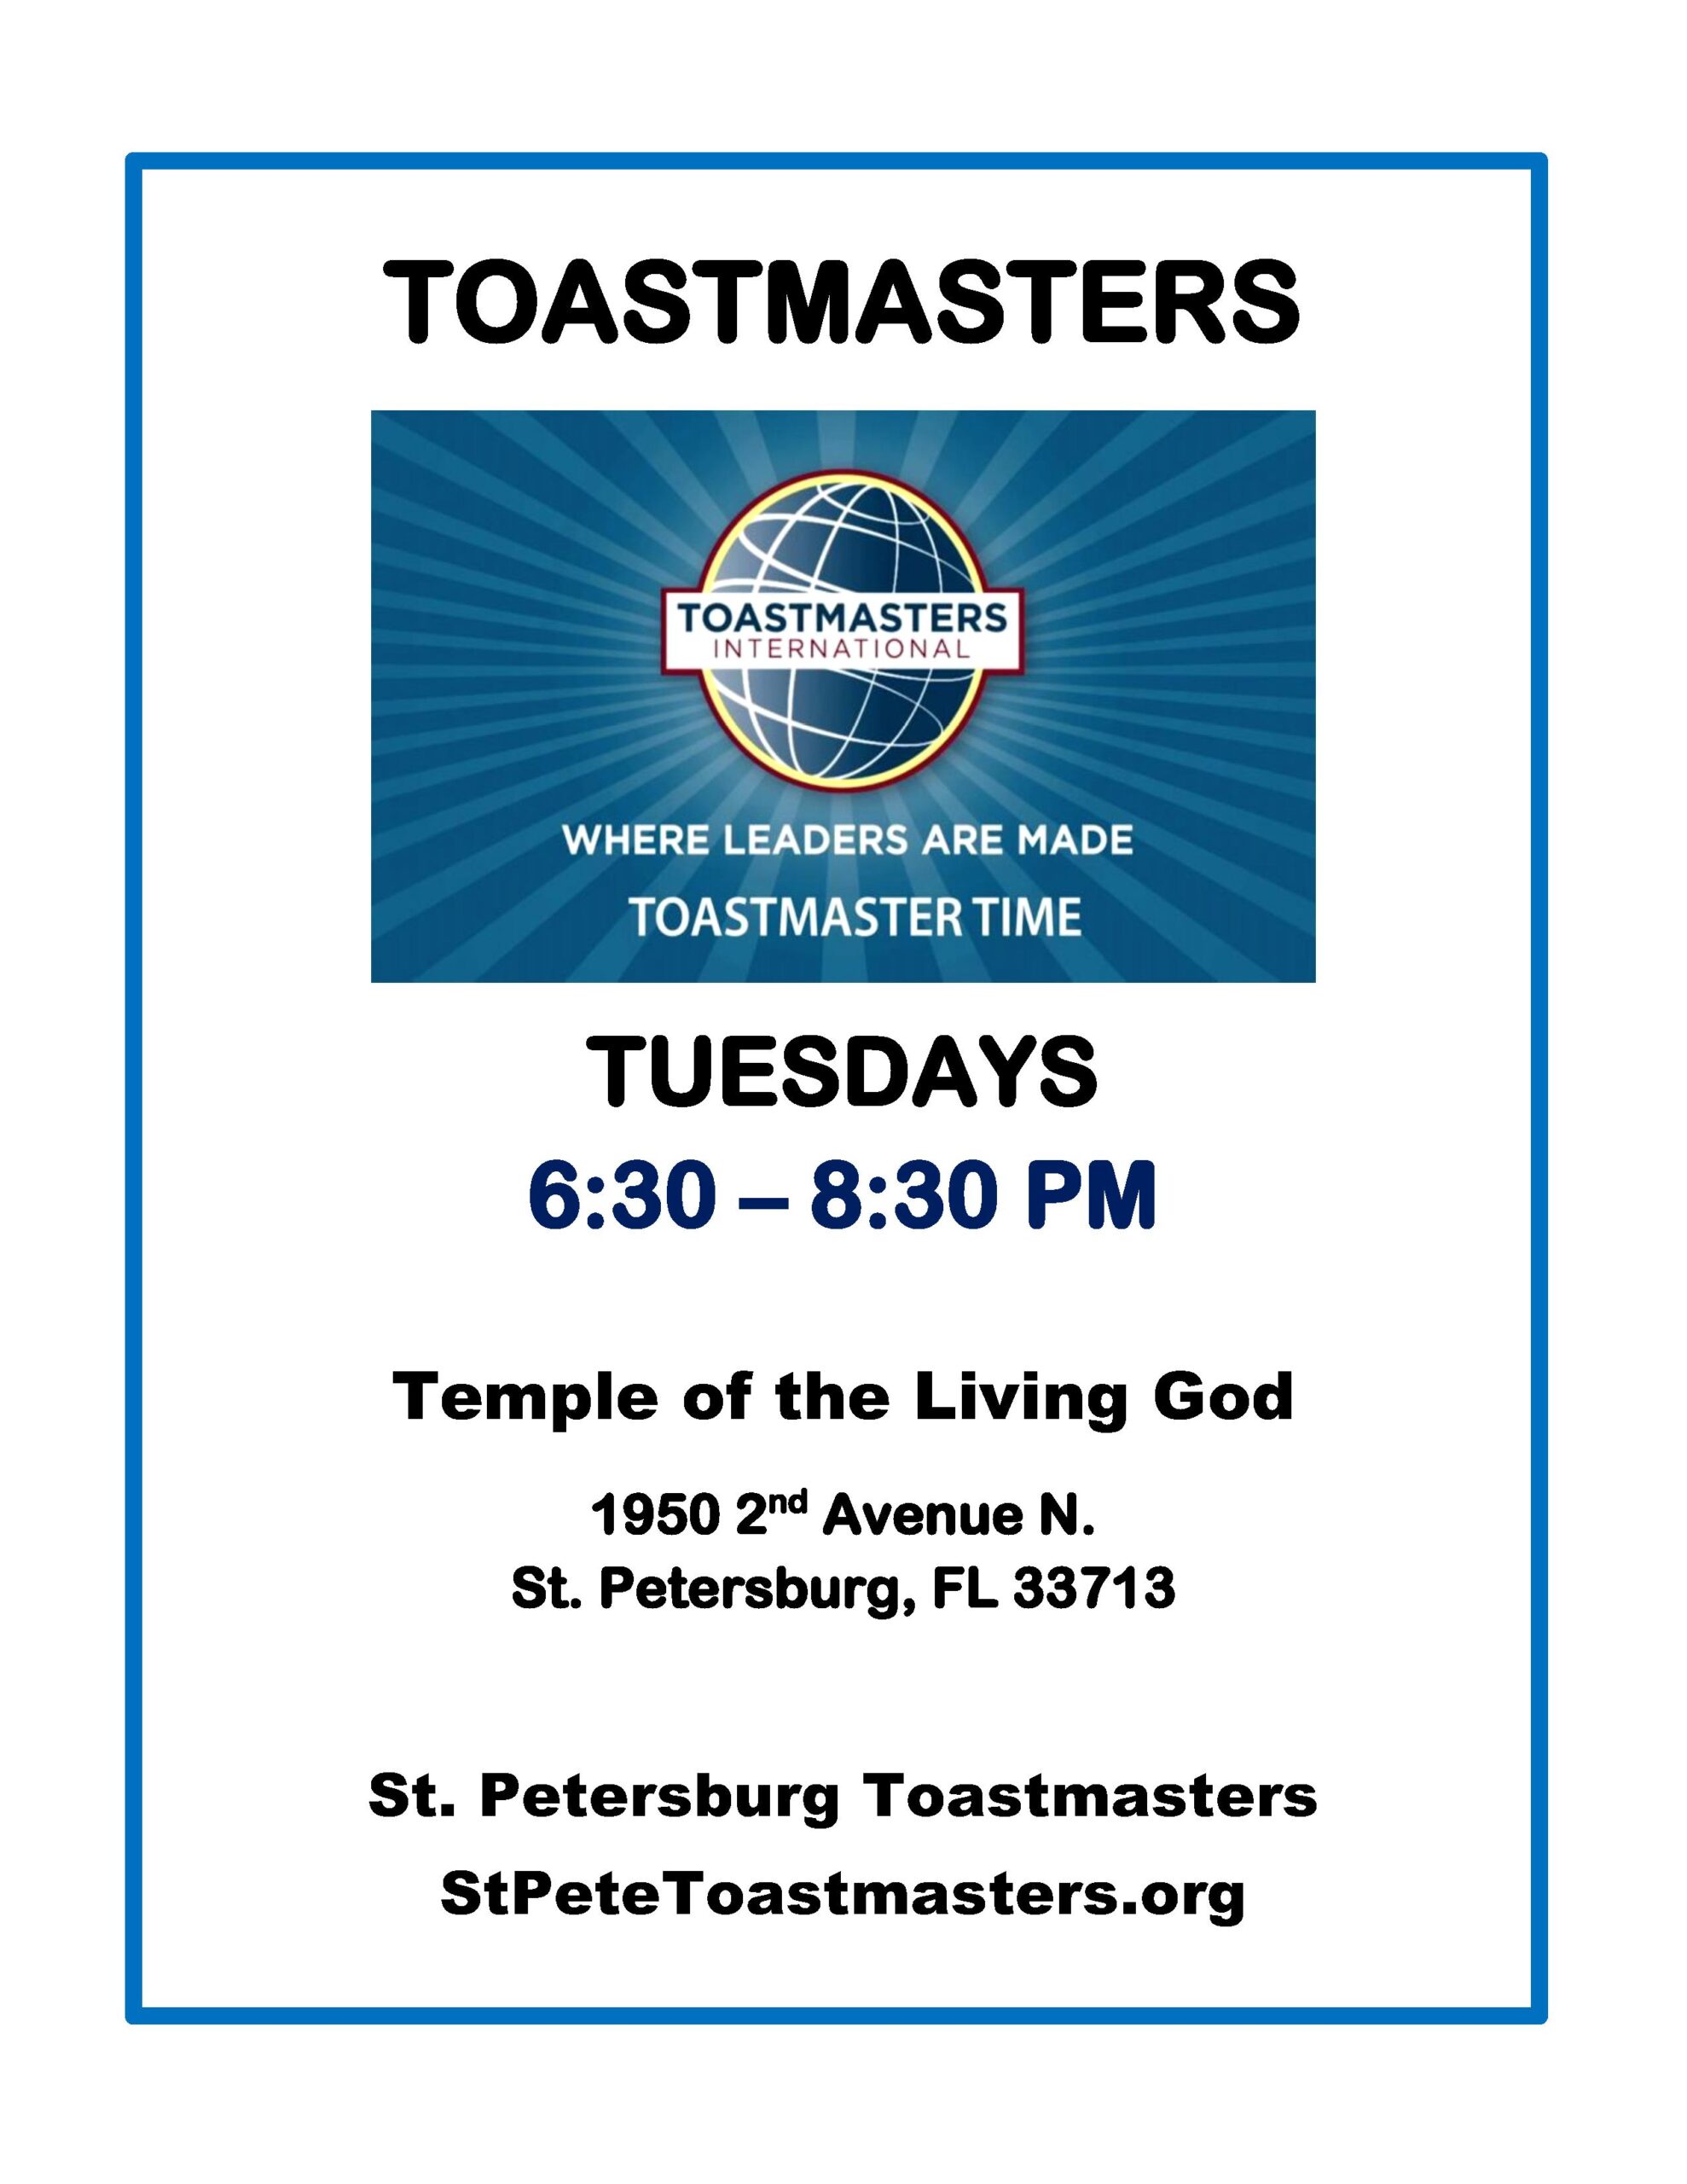 Toastmasters @ Temple of the Living God